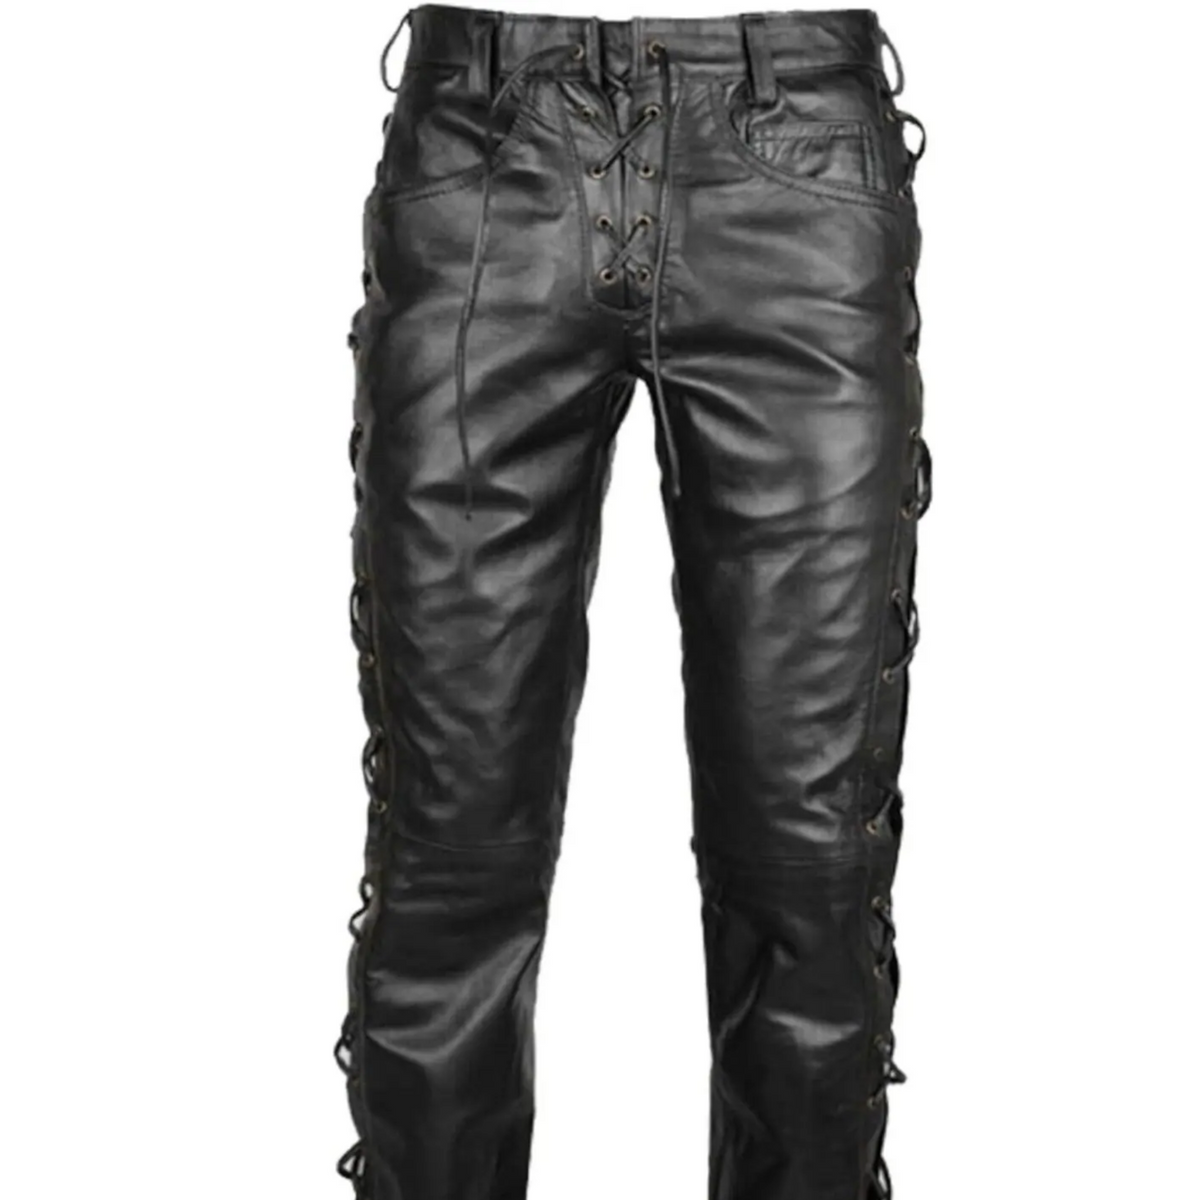 Lace up Leather Pants / Biker Leather Motorcycle Pants -  Canada